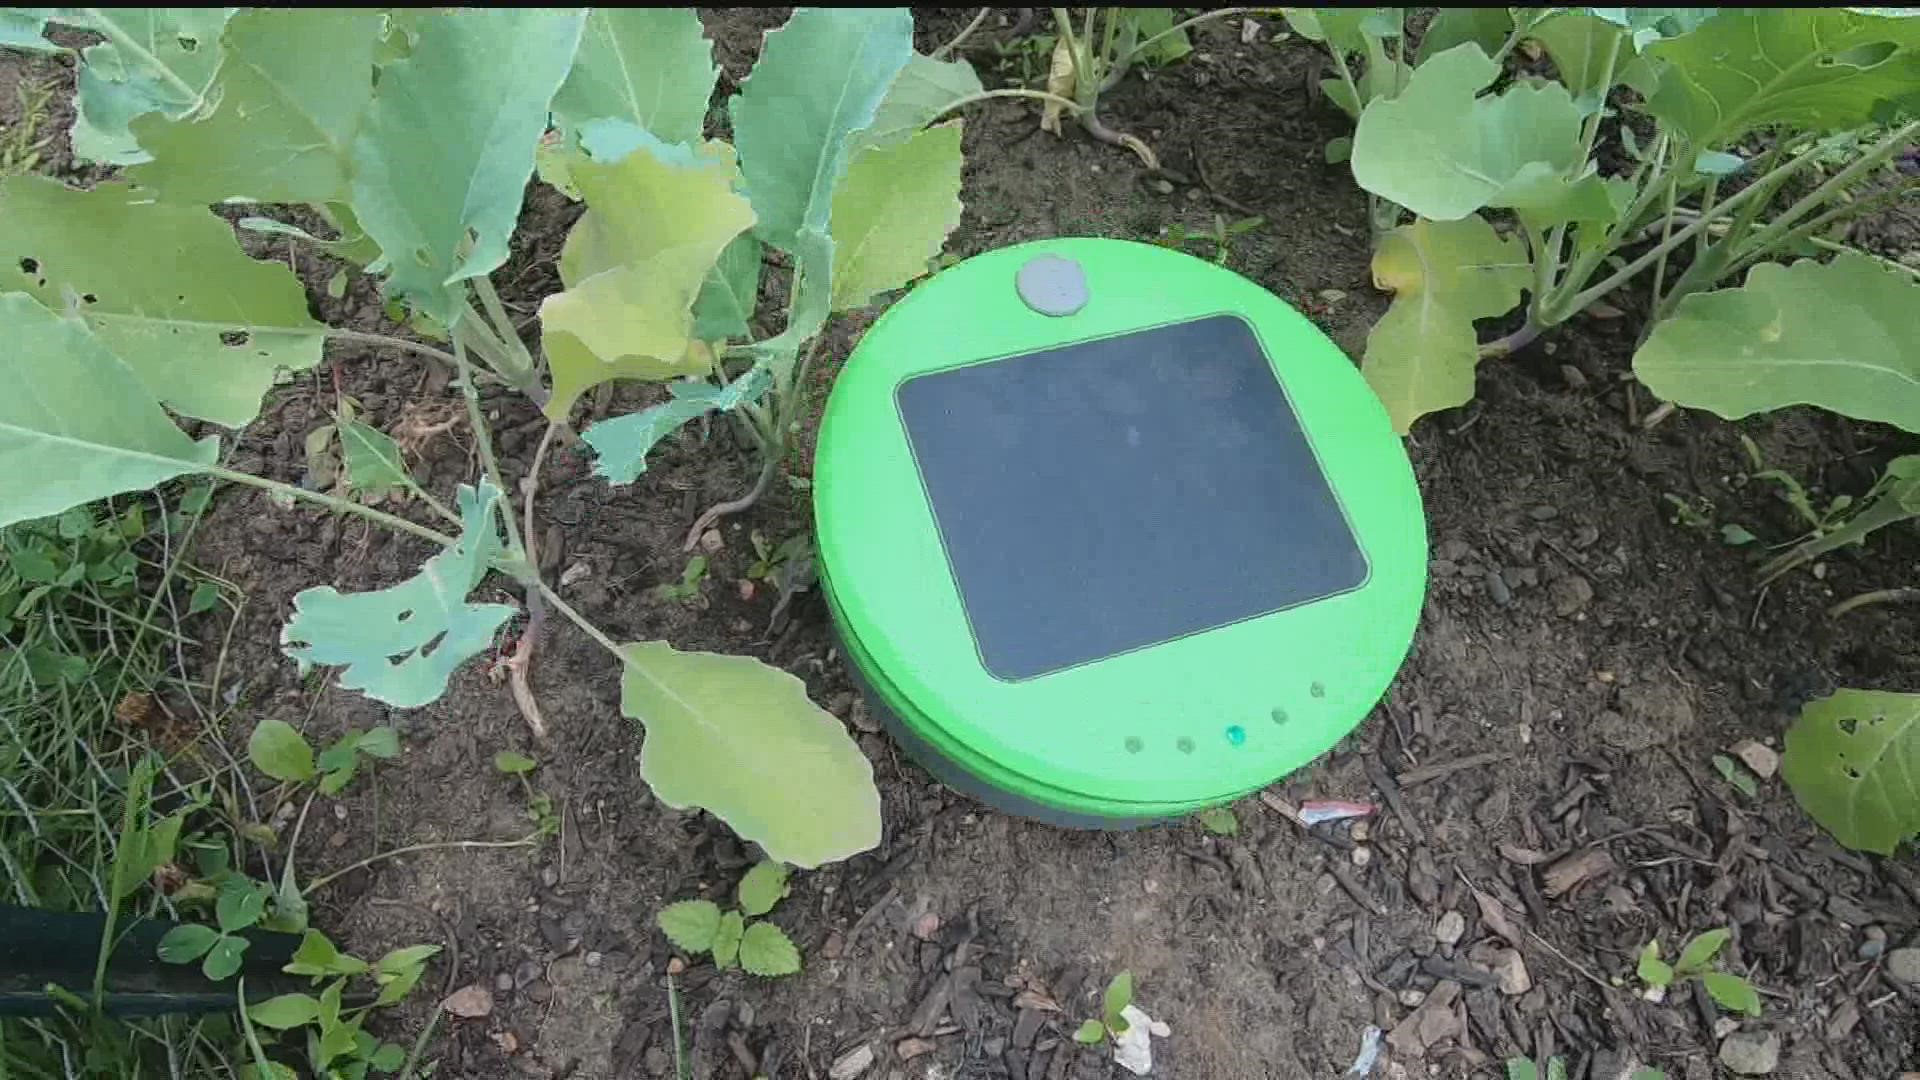 A robot that weeds your garden sounds futuristic and too good to be true. Bobby and Laura give it a try.